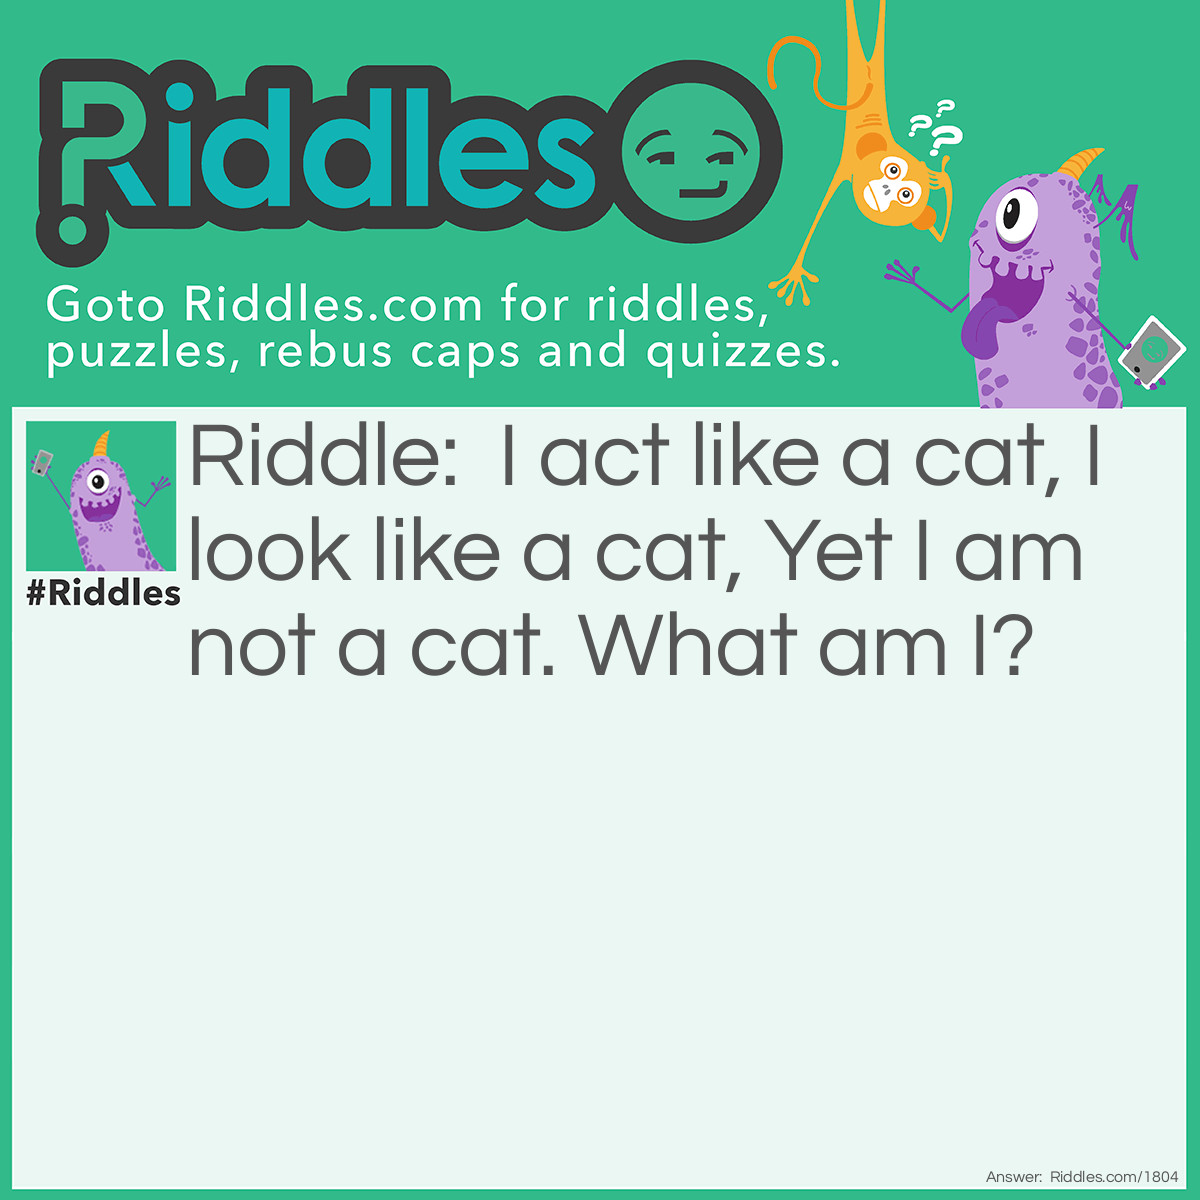 Riddle: I act like a cat, I look like a cat, Yet I am not a cat. What am I? Answer: Kitten.